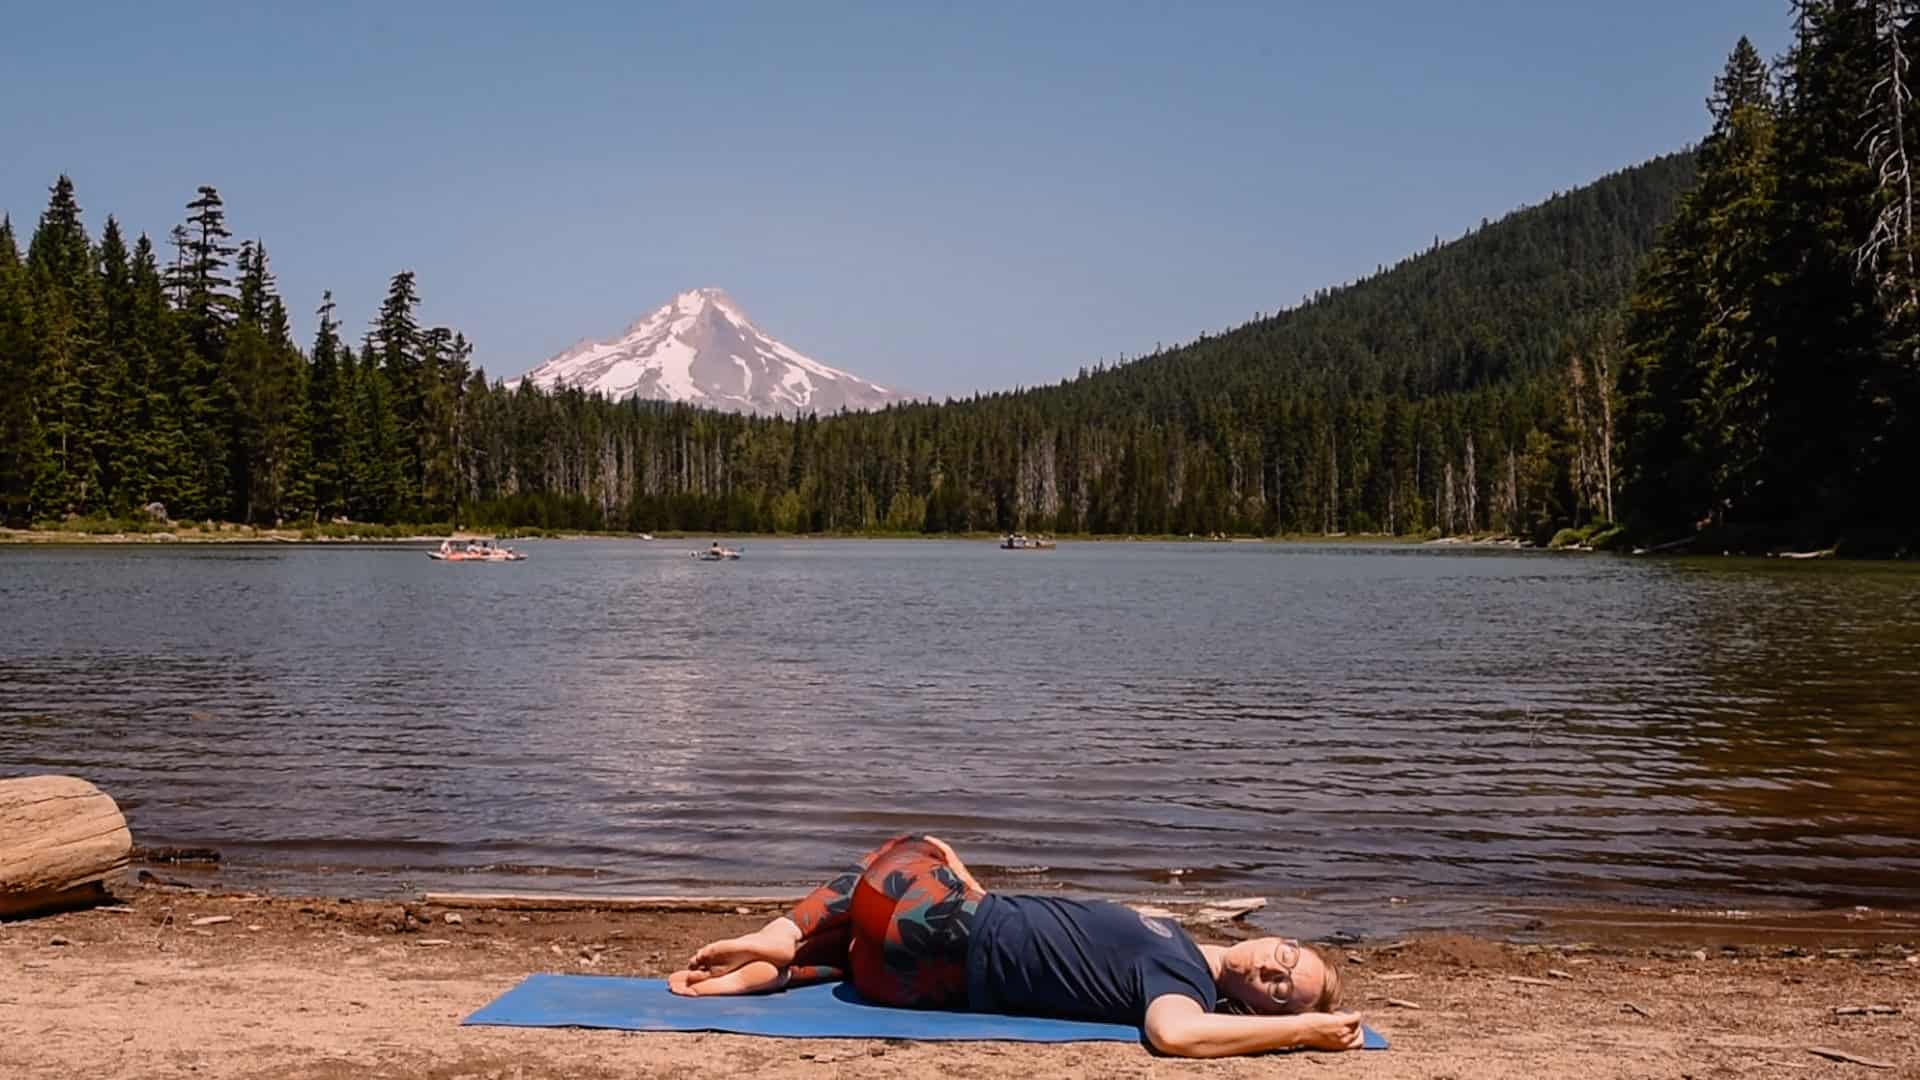 Emmy doing supine twist near an alpine lake for yoga to feel your best